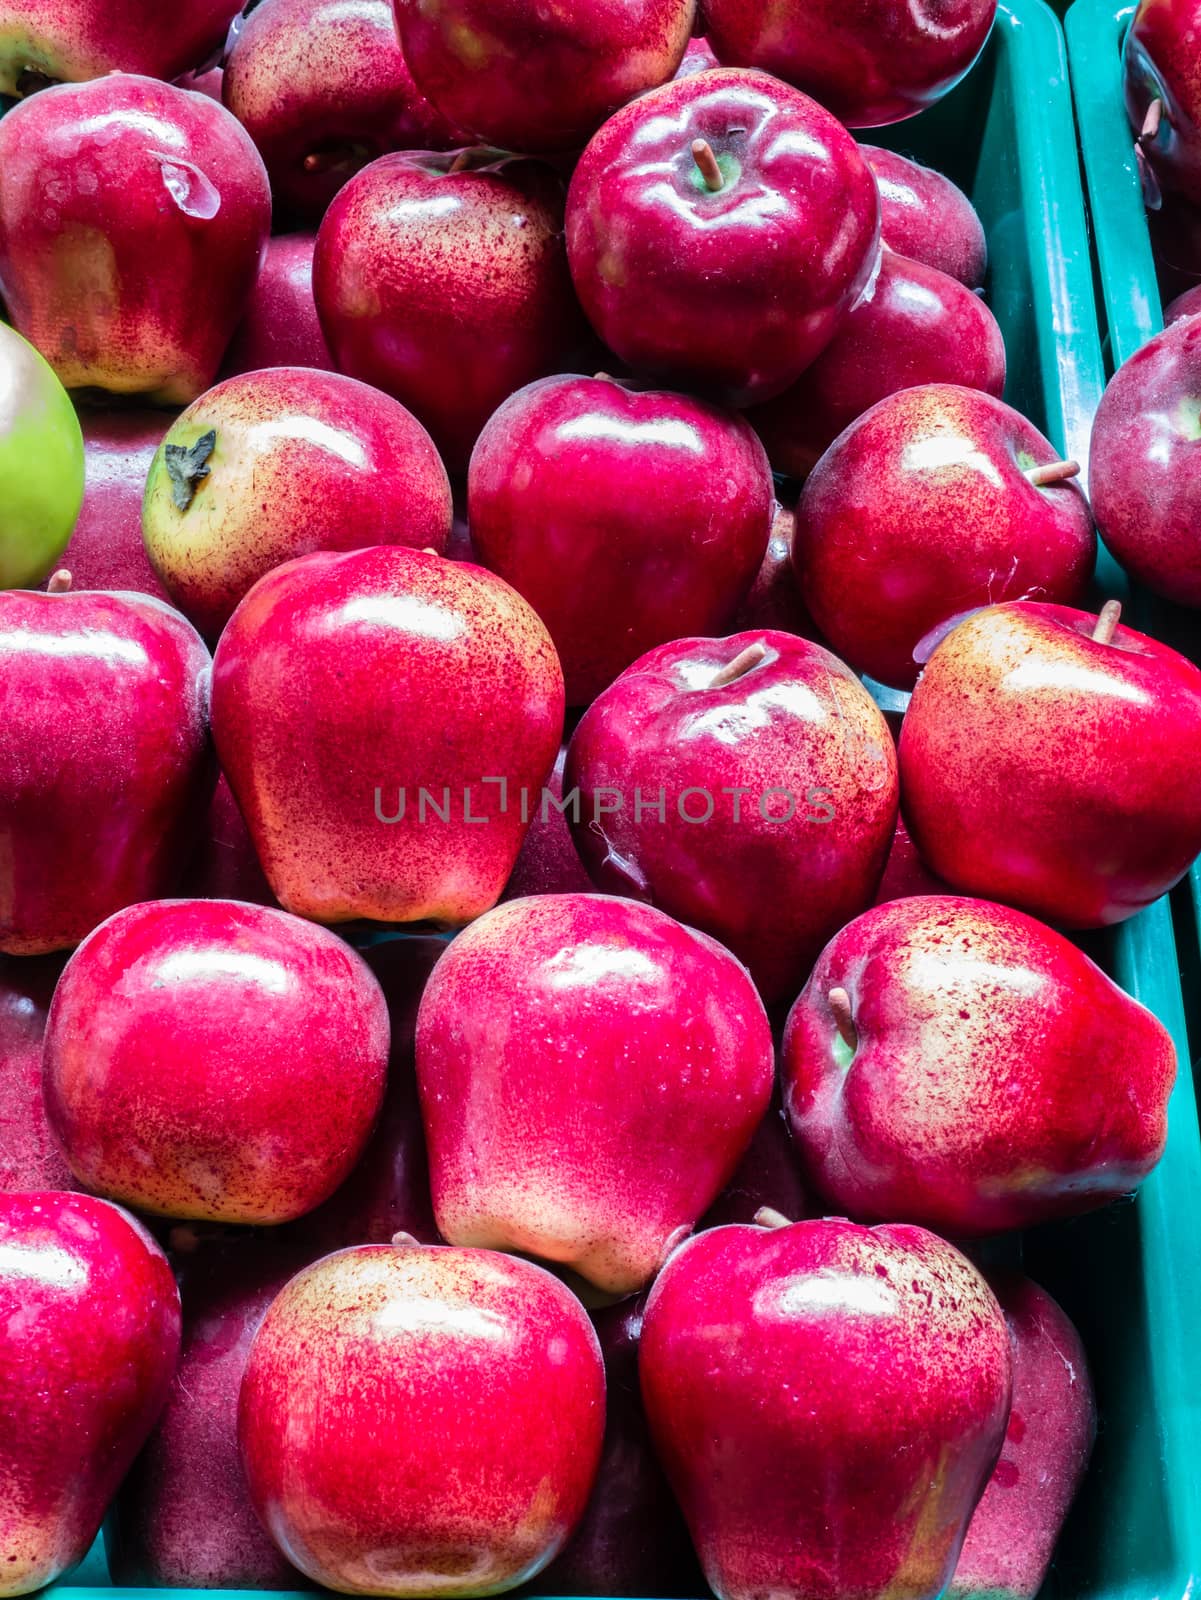 Red apples in plastic crates by golengstock